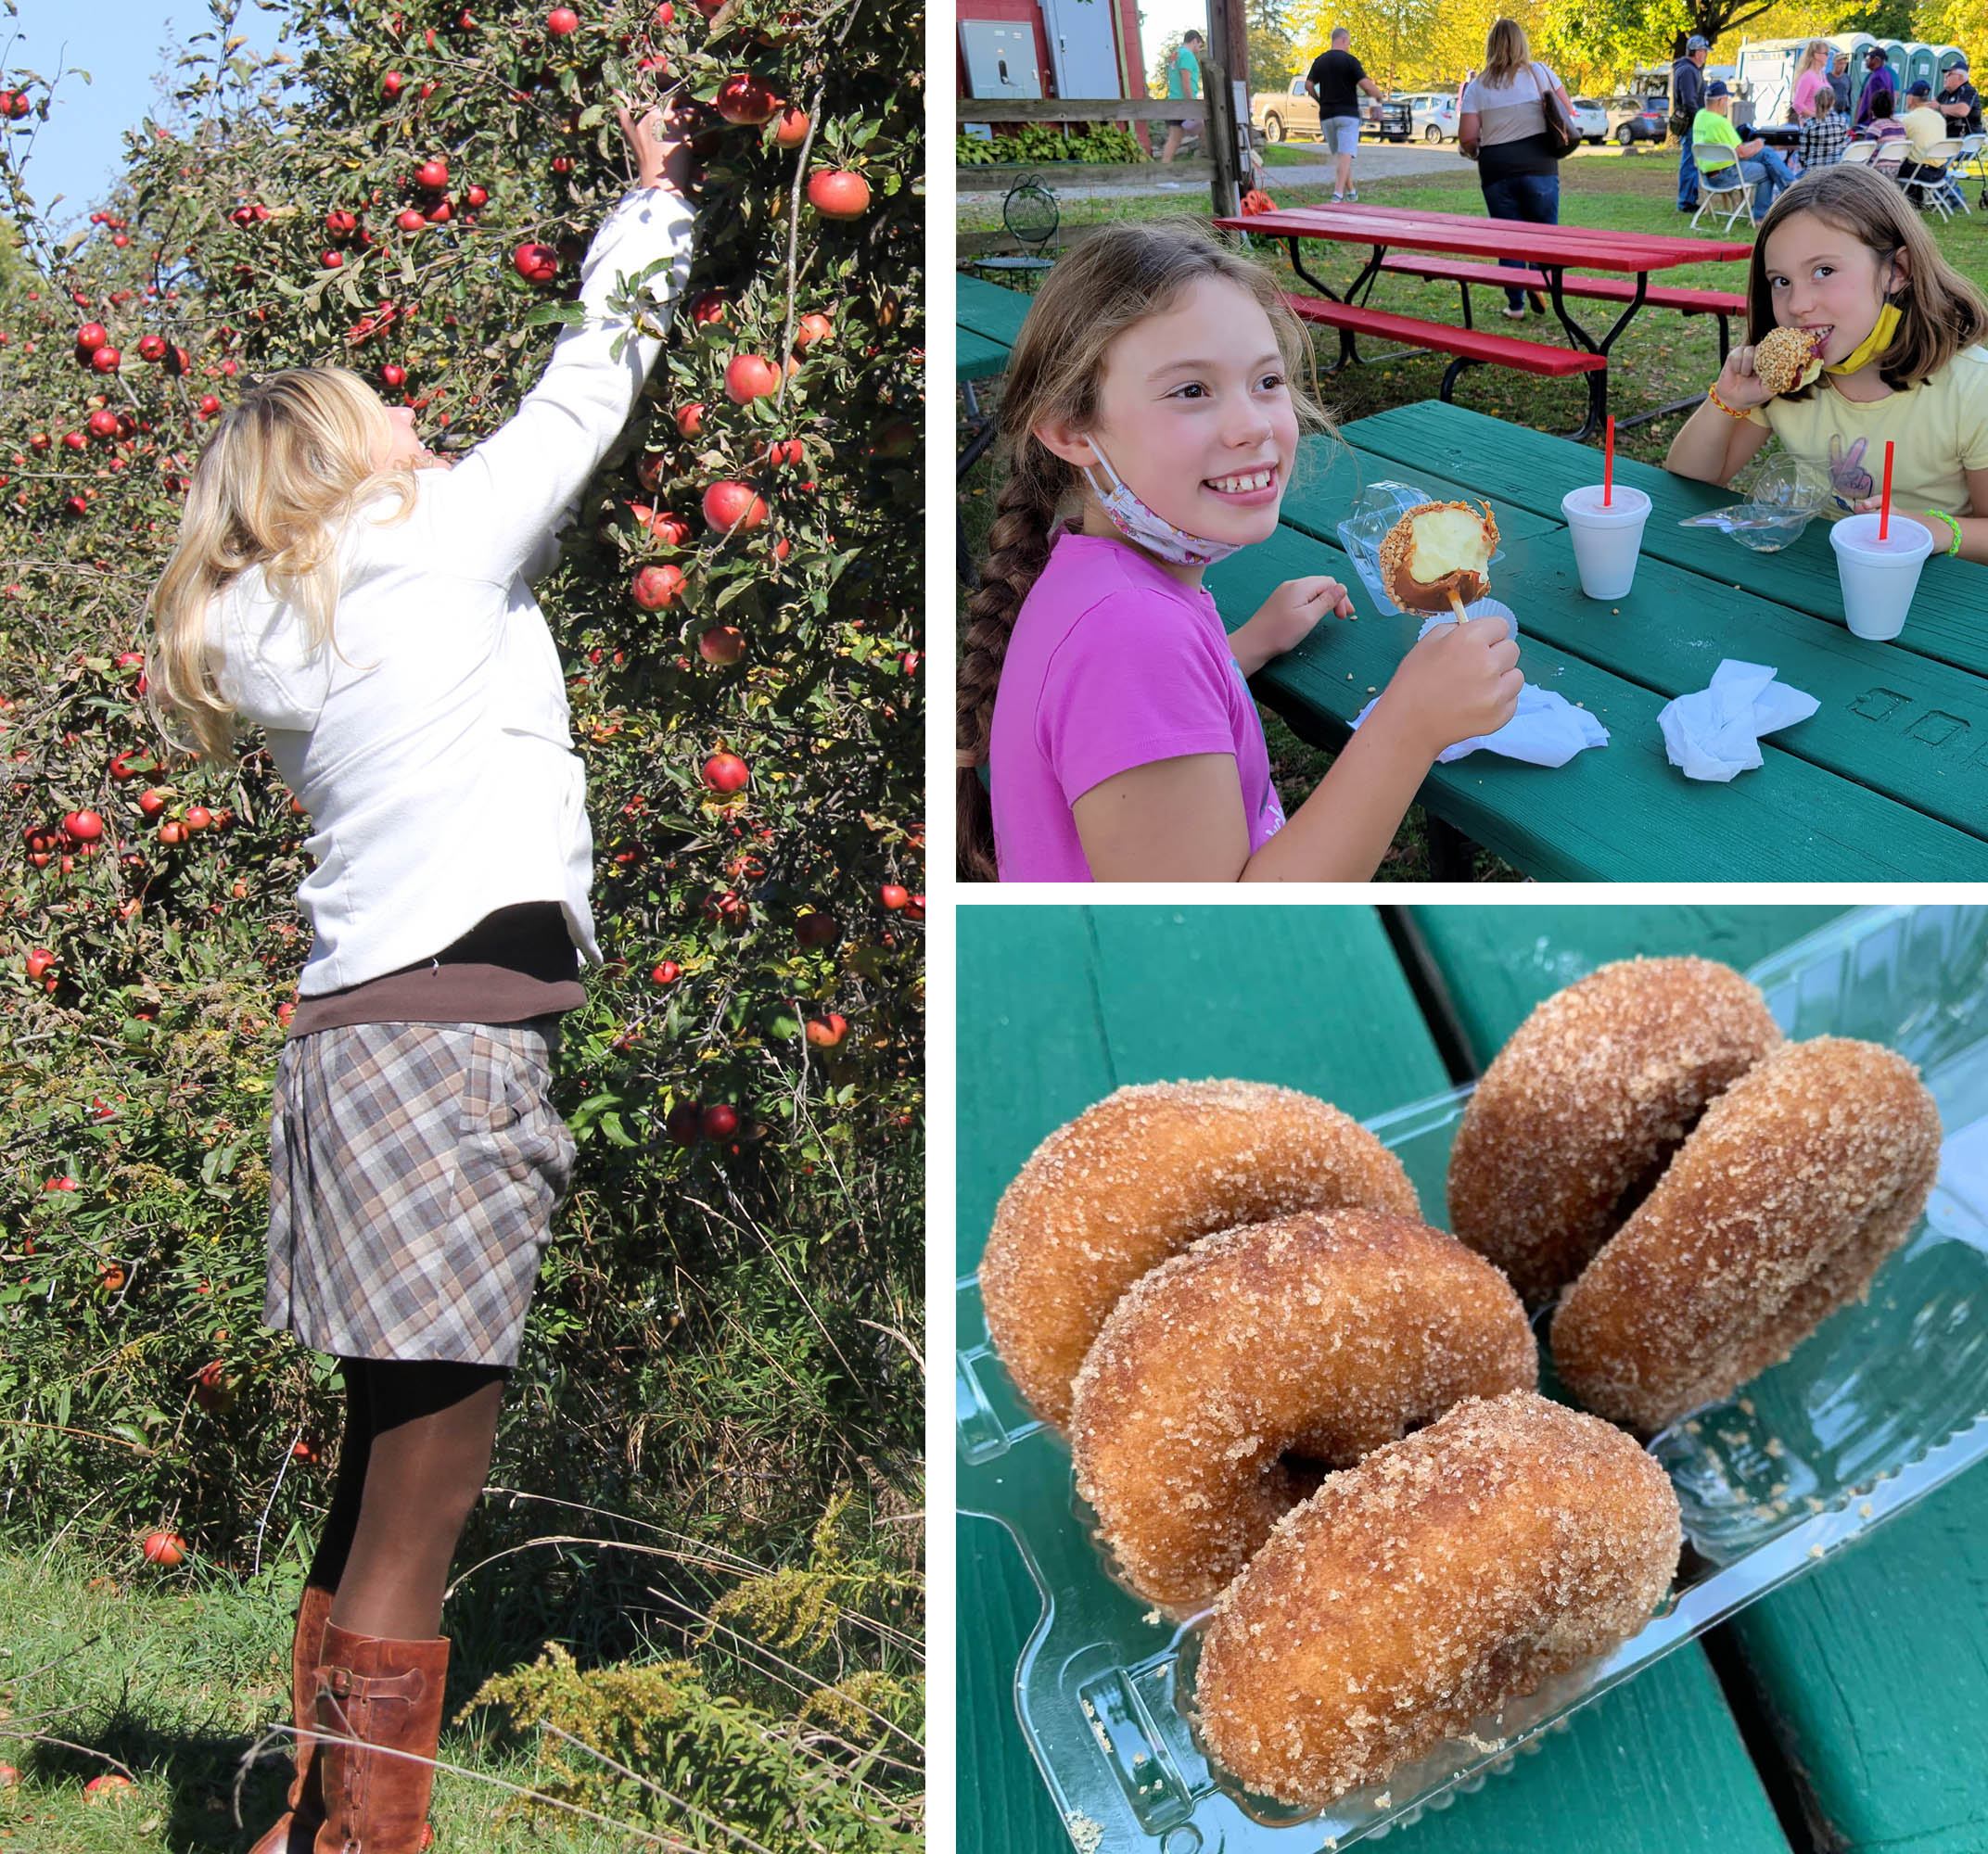 Customers pick apples and eat caramel apples at Porter's Orchard